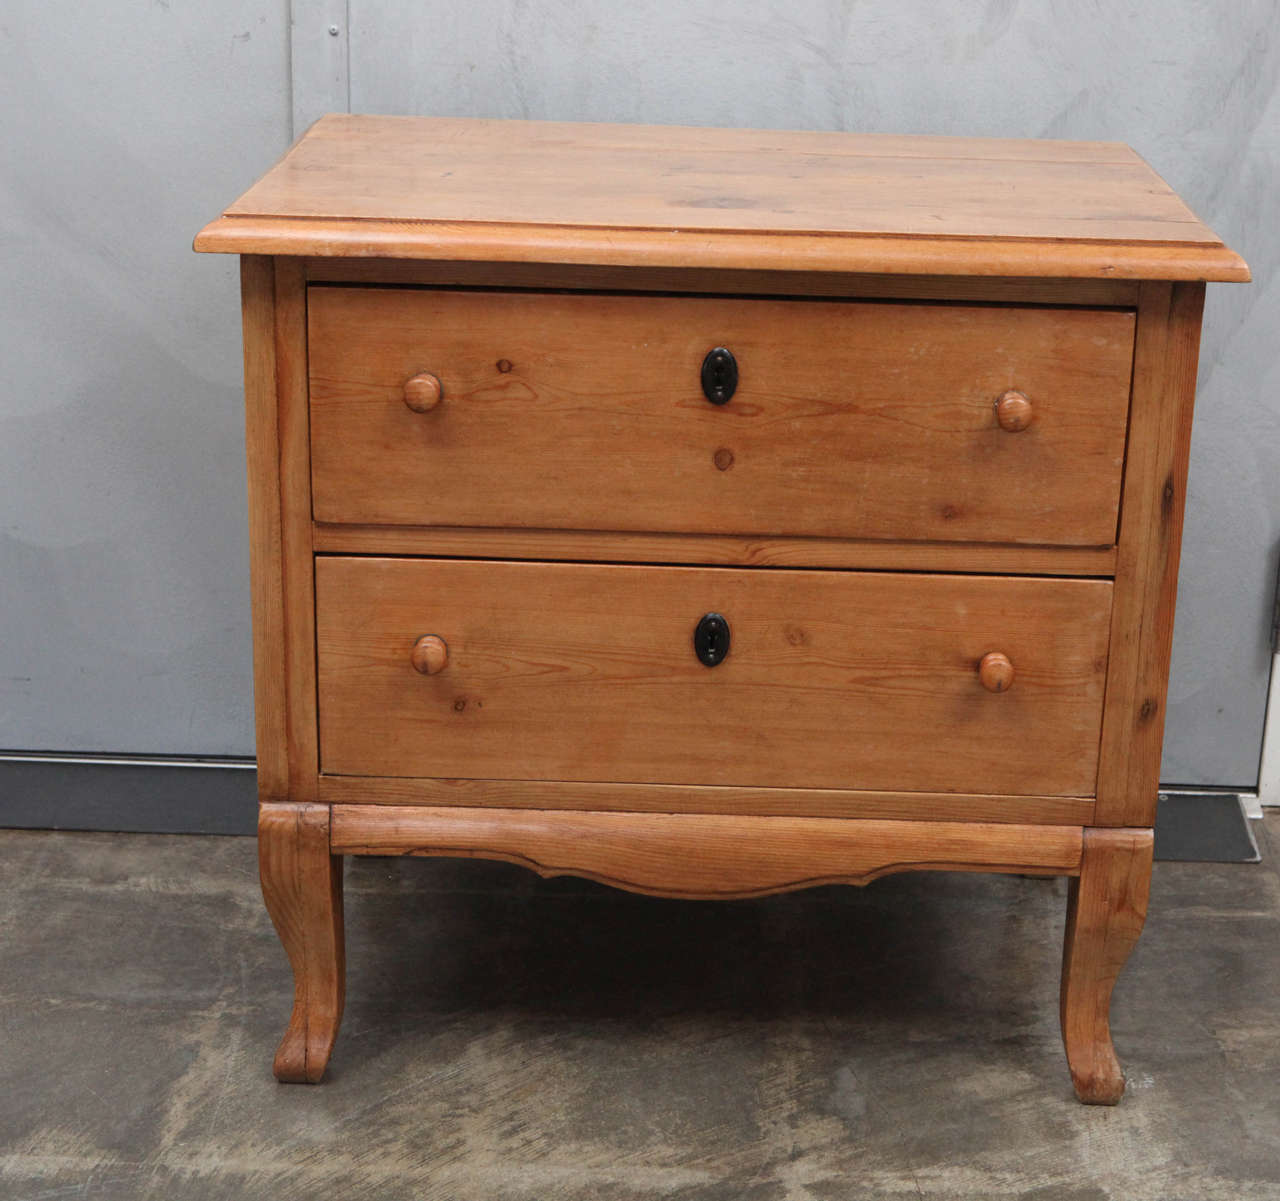 This is a excellent example of great craftsmanship with beautifully turned wooden knobs, beveled and shaped apron at the bottom and nicely shaped sturdy legs. The solid dovetail joints on this handsome little piece is more evidence of its quality